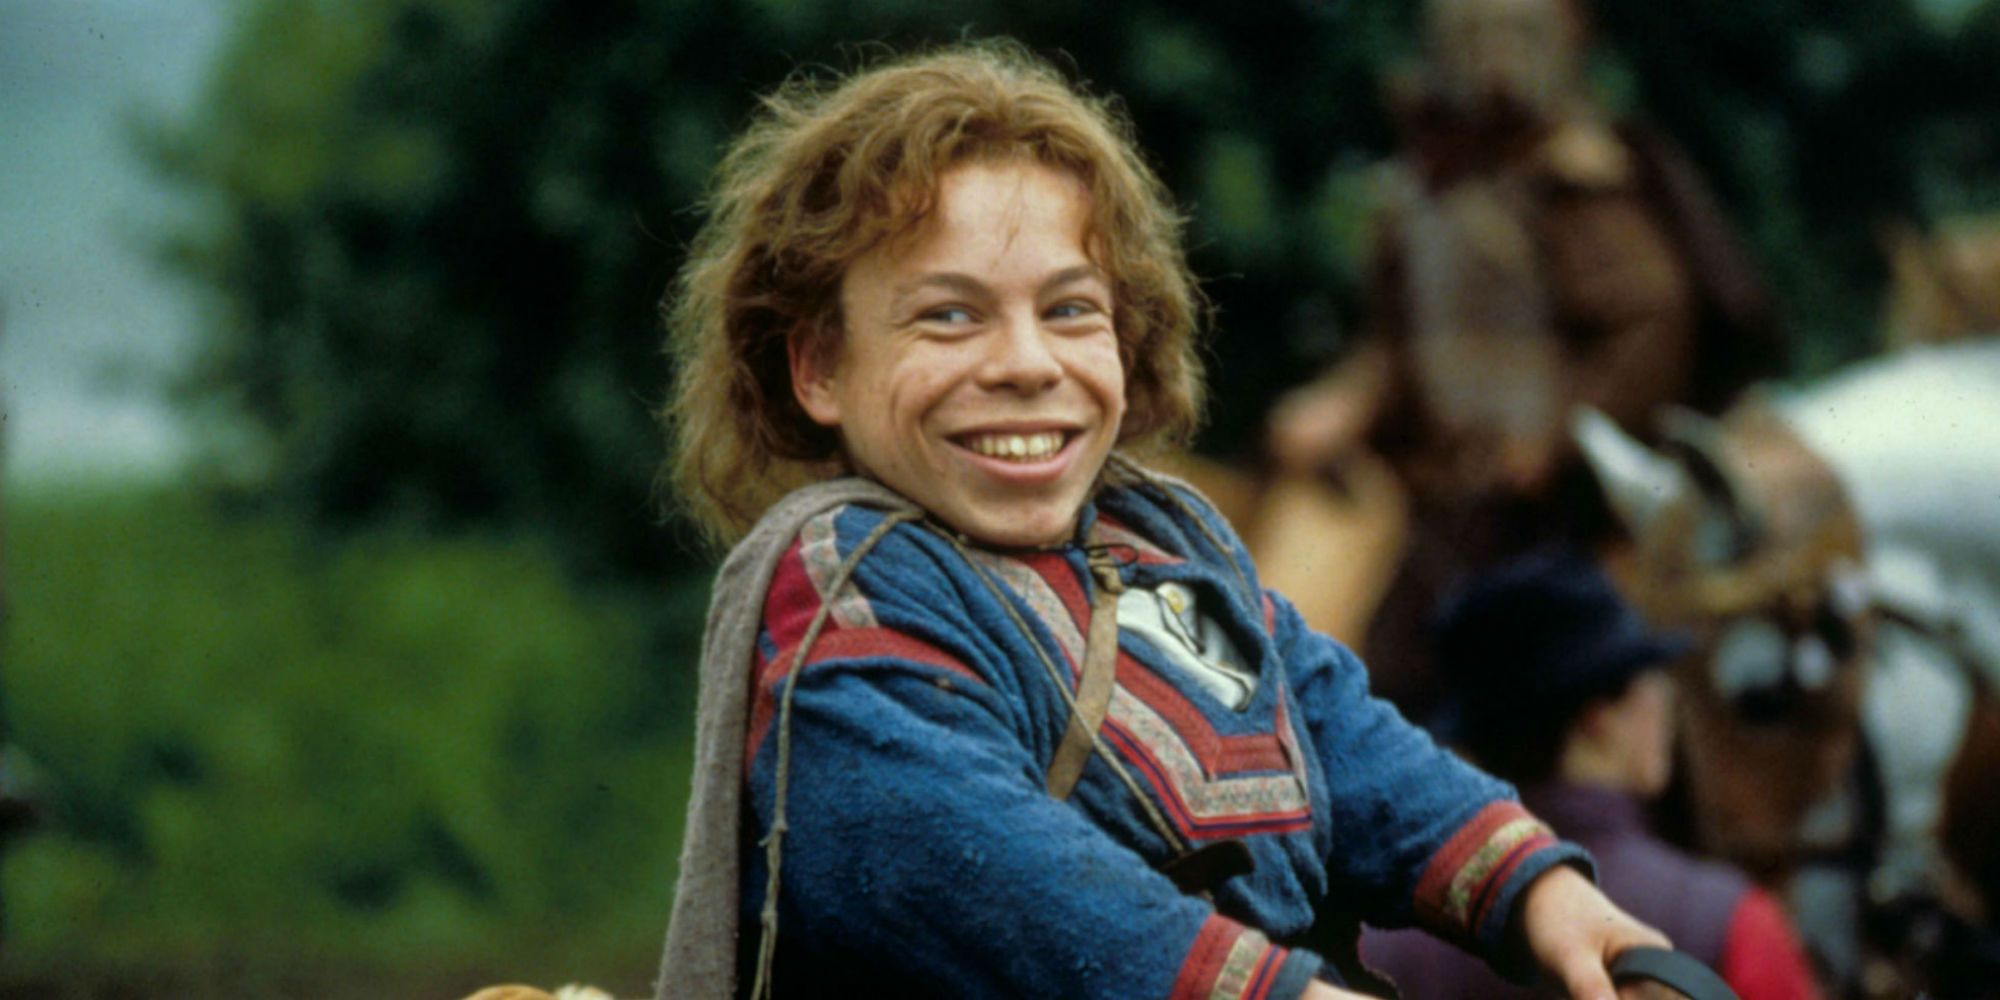 Warwick Davis smiling while riding a horse in Willow